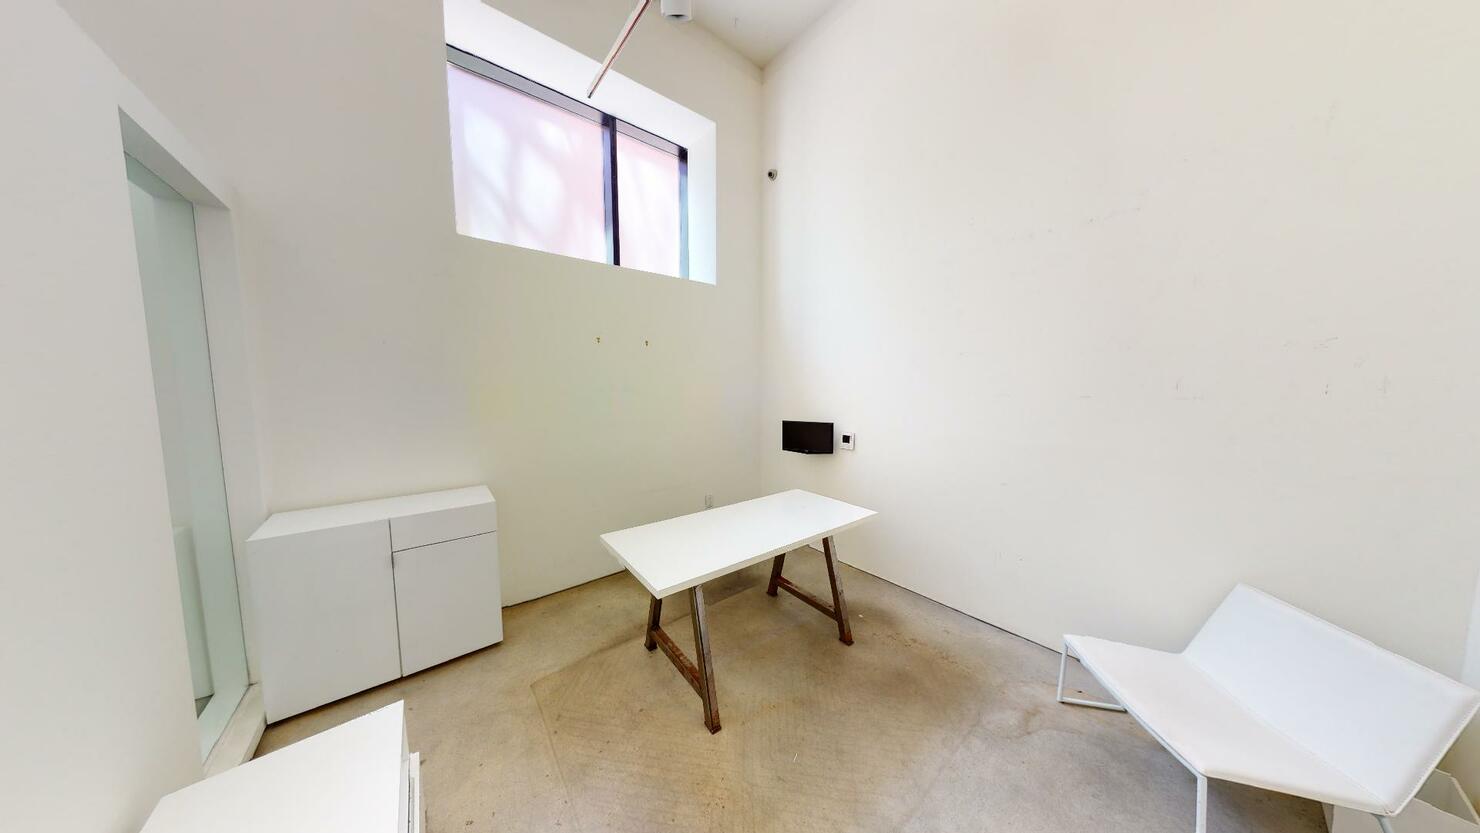 540 West 28th Street Office Space - Office Room with Lounge